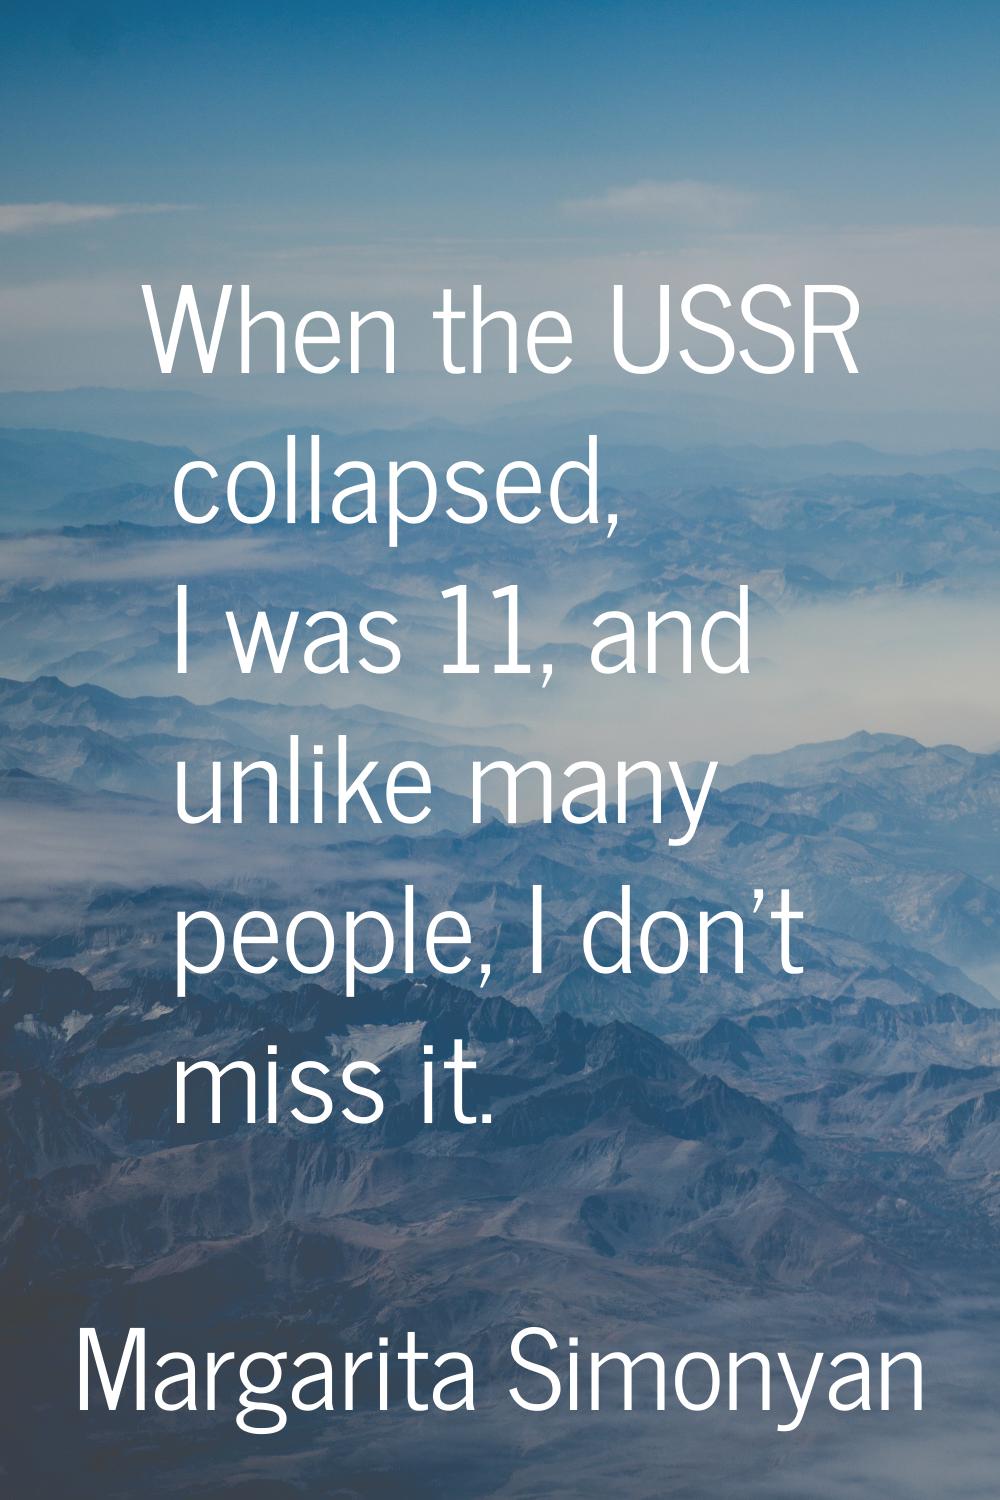 When the USSR collapsed, I was 11, and unlike many people, I don't miss it.